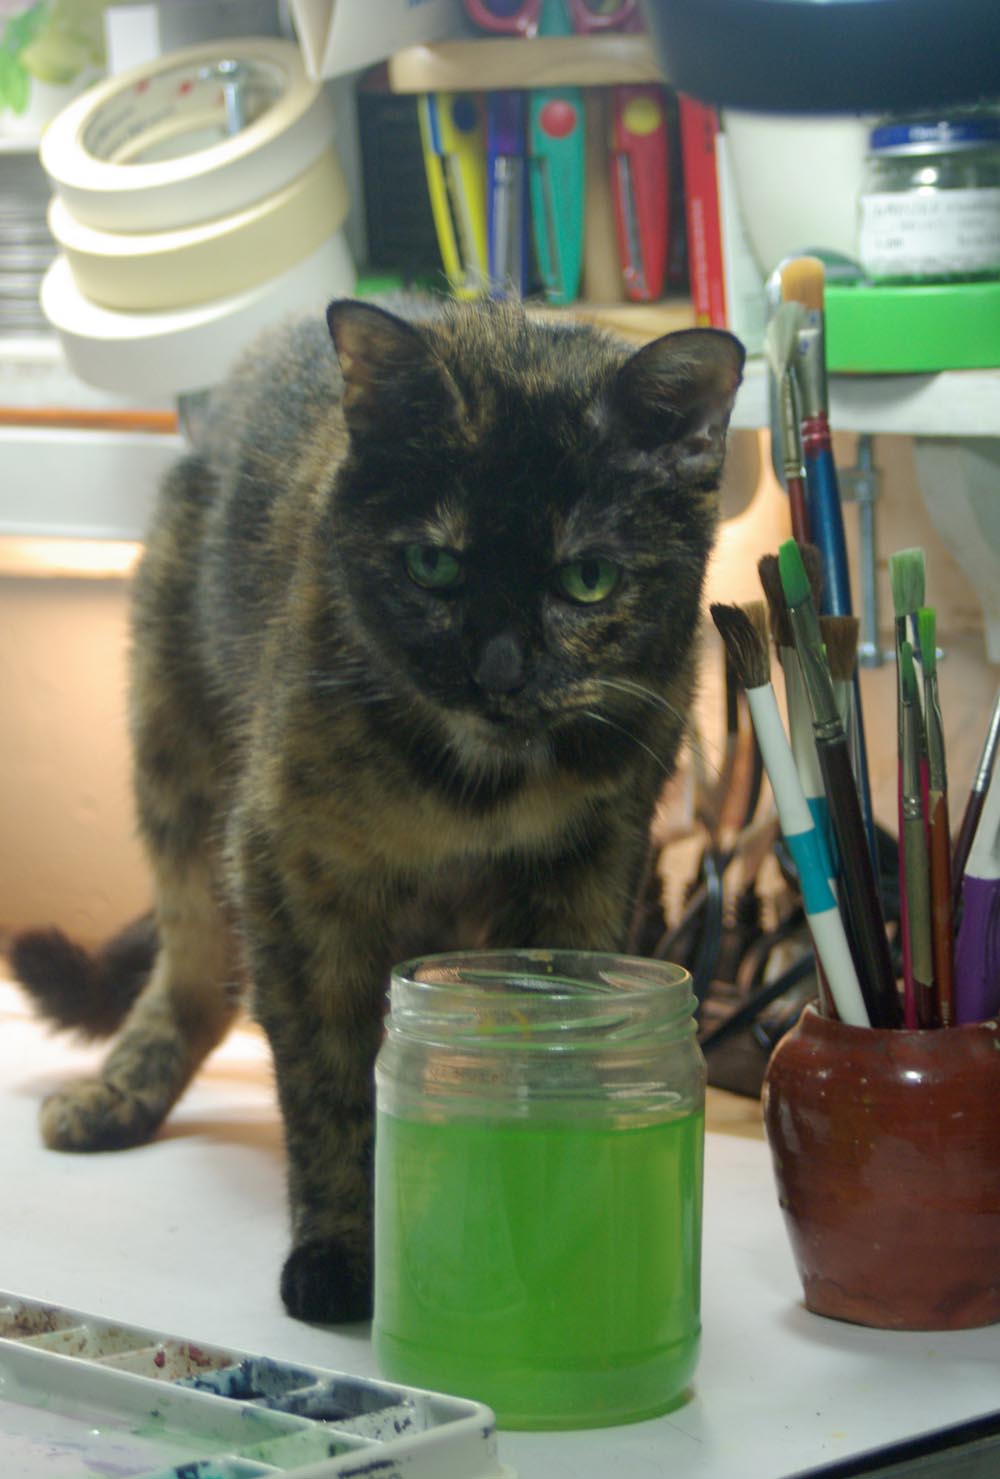 totoiseshell cat looking up over jar of green water